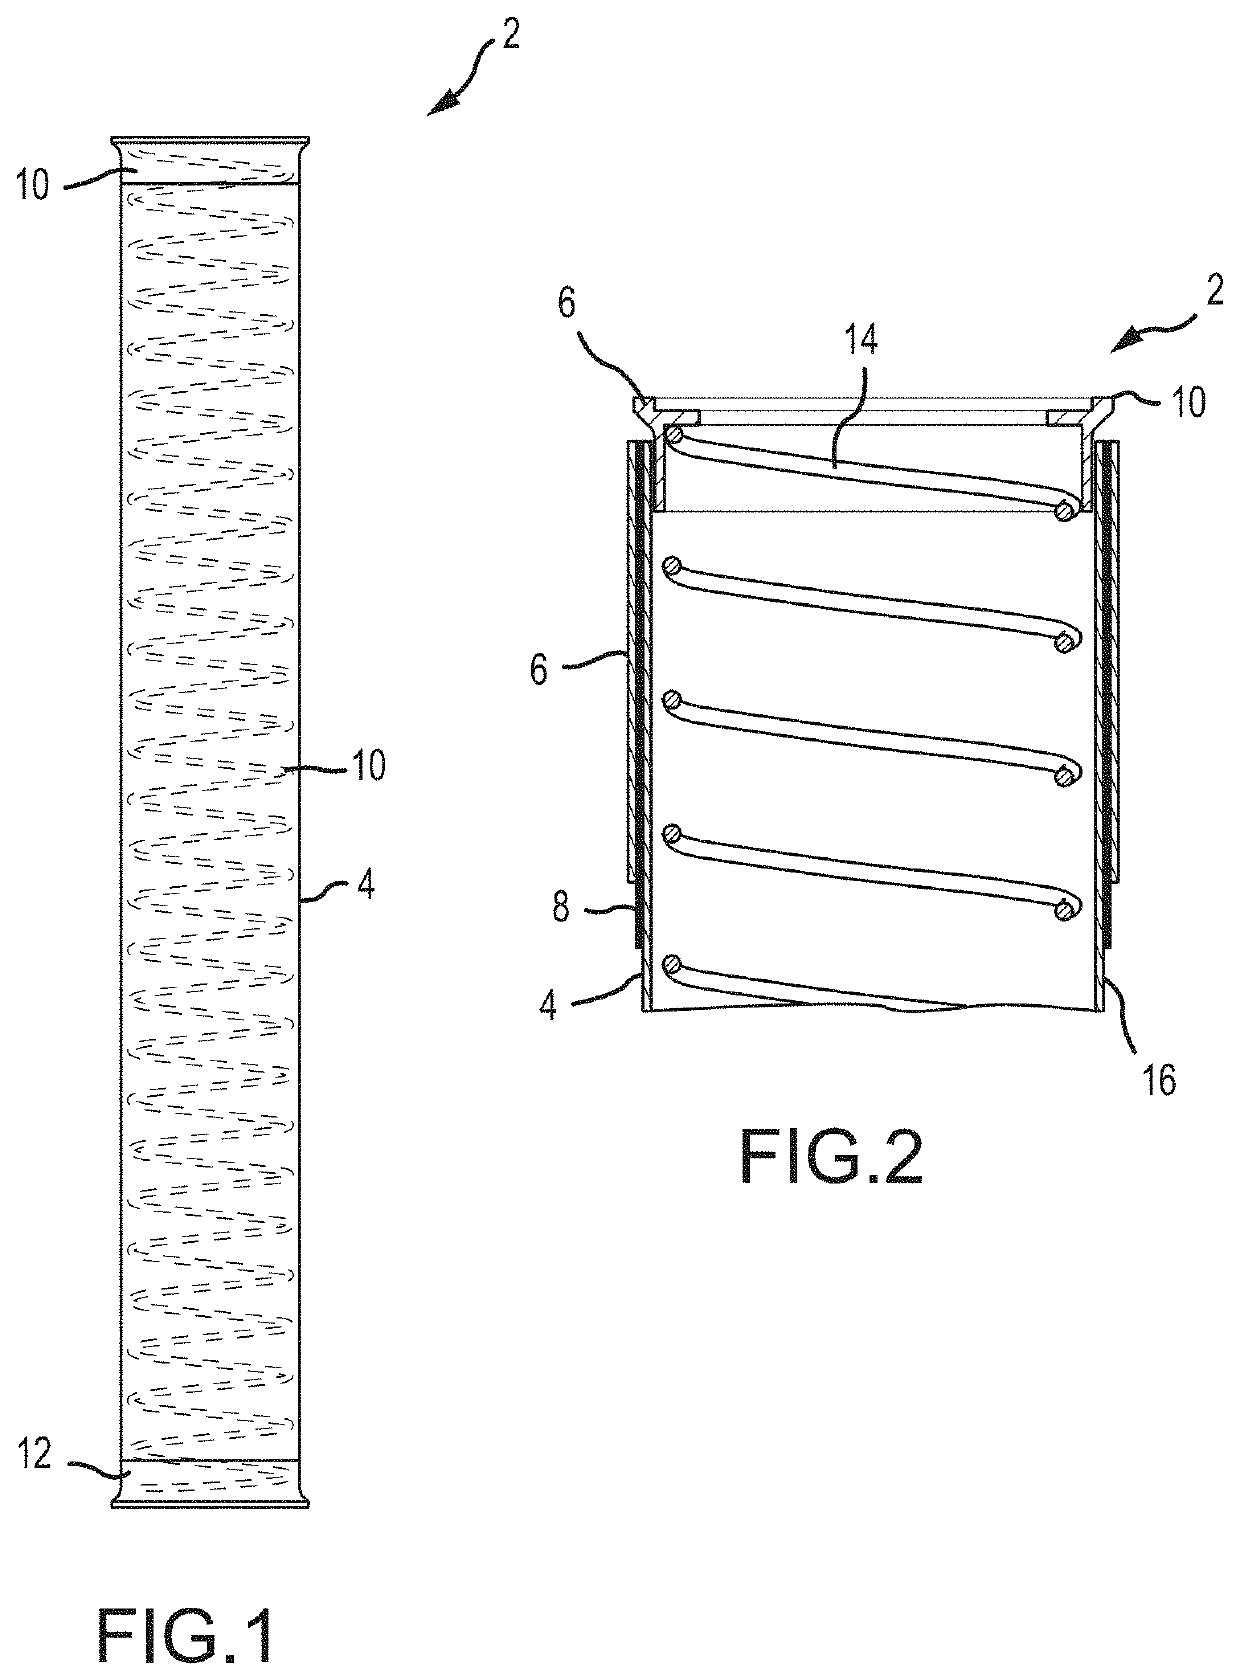 Flexible composite duct for the transport of cryogenic fuels and oxidizers